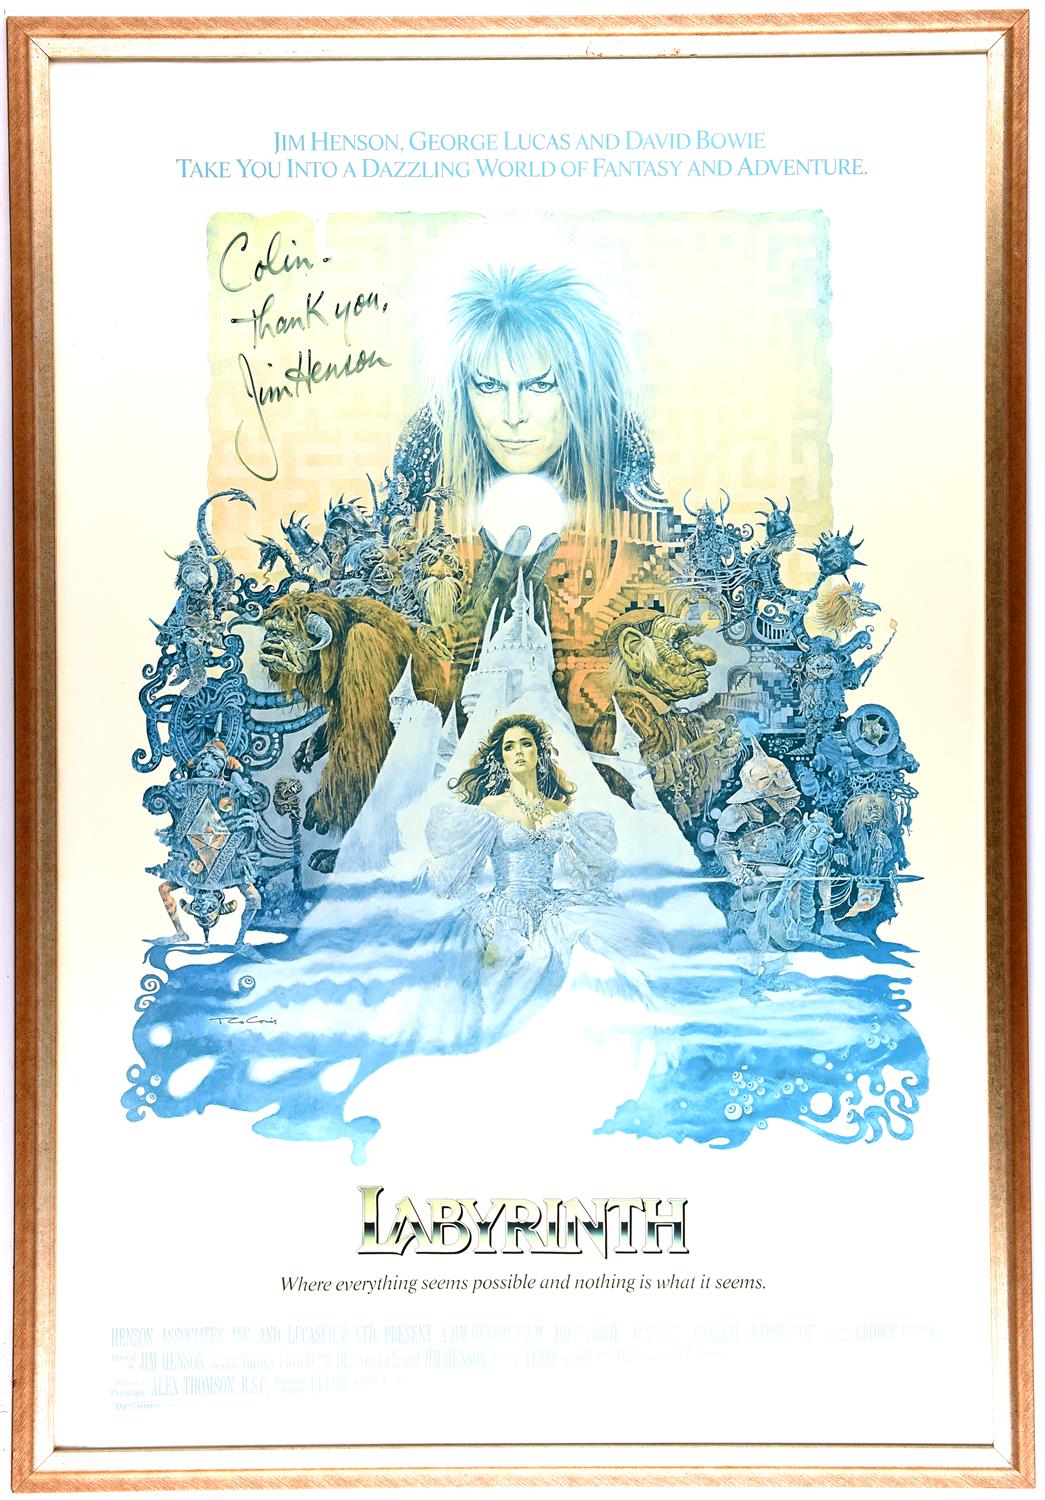 Labyrinth (1986). Jim Henson autographed crew- gift US One Sheet film poster, signed top left by